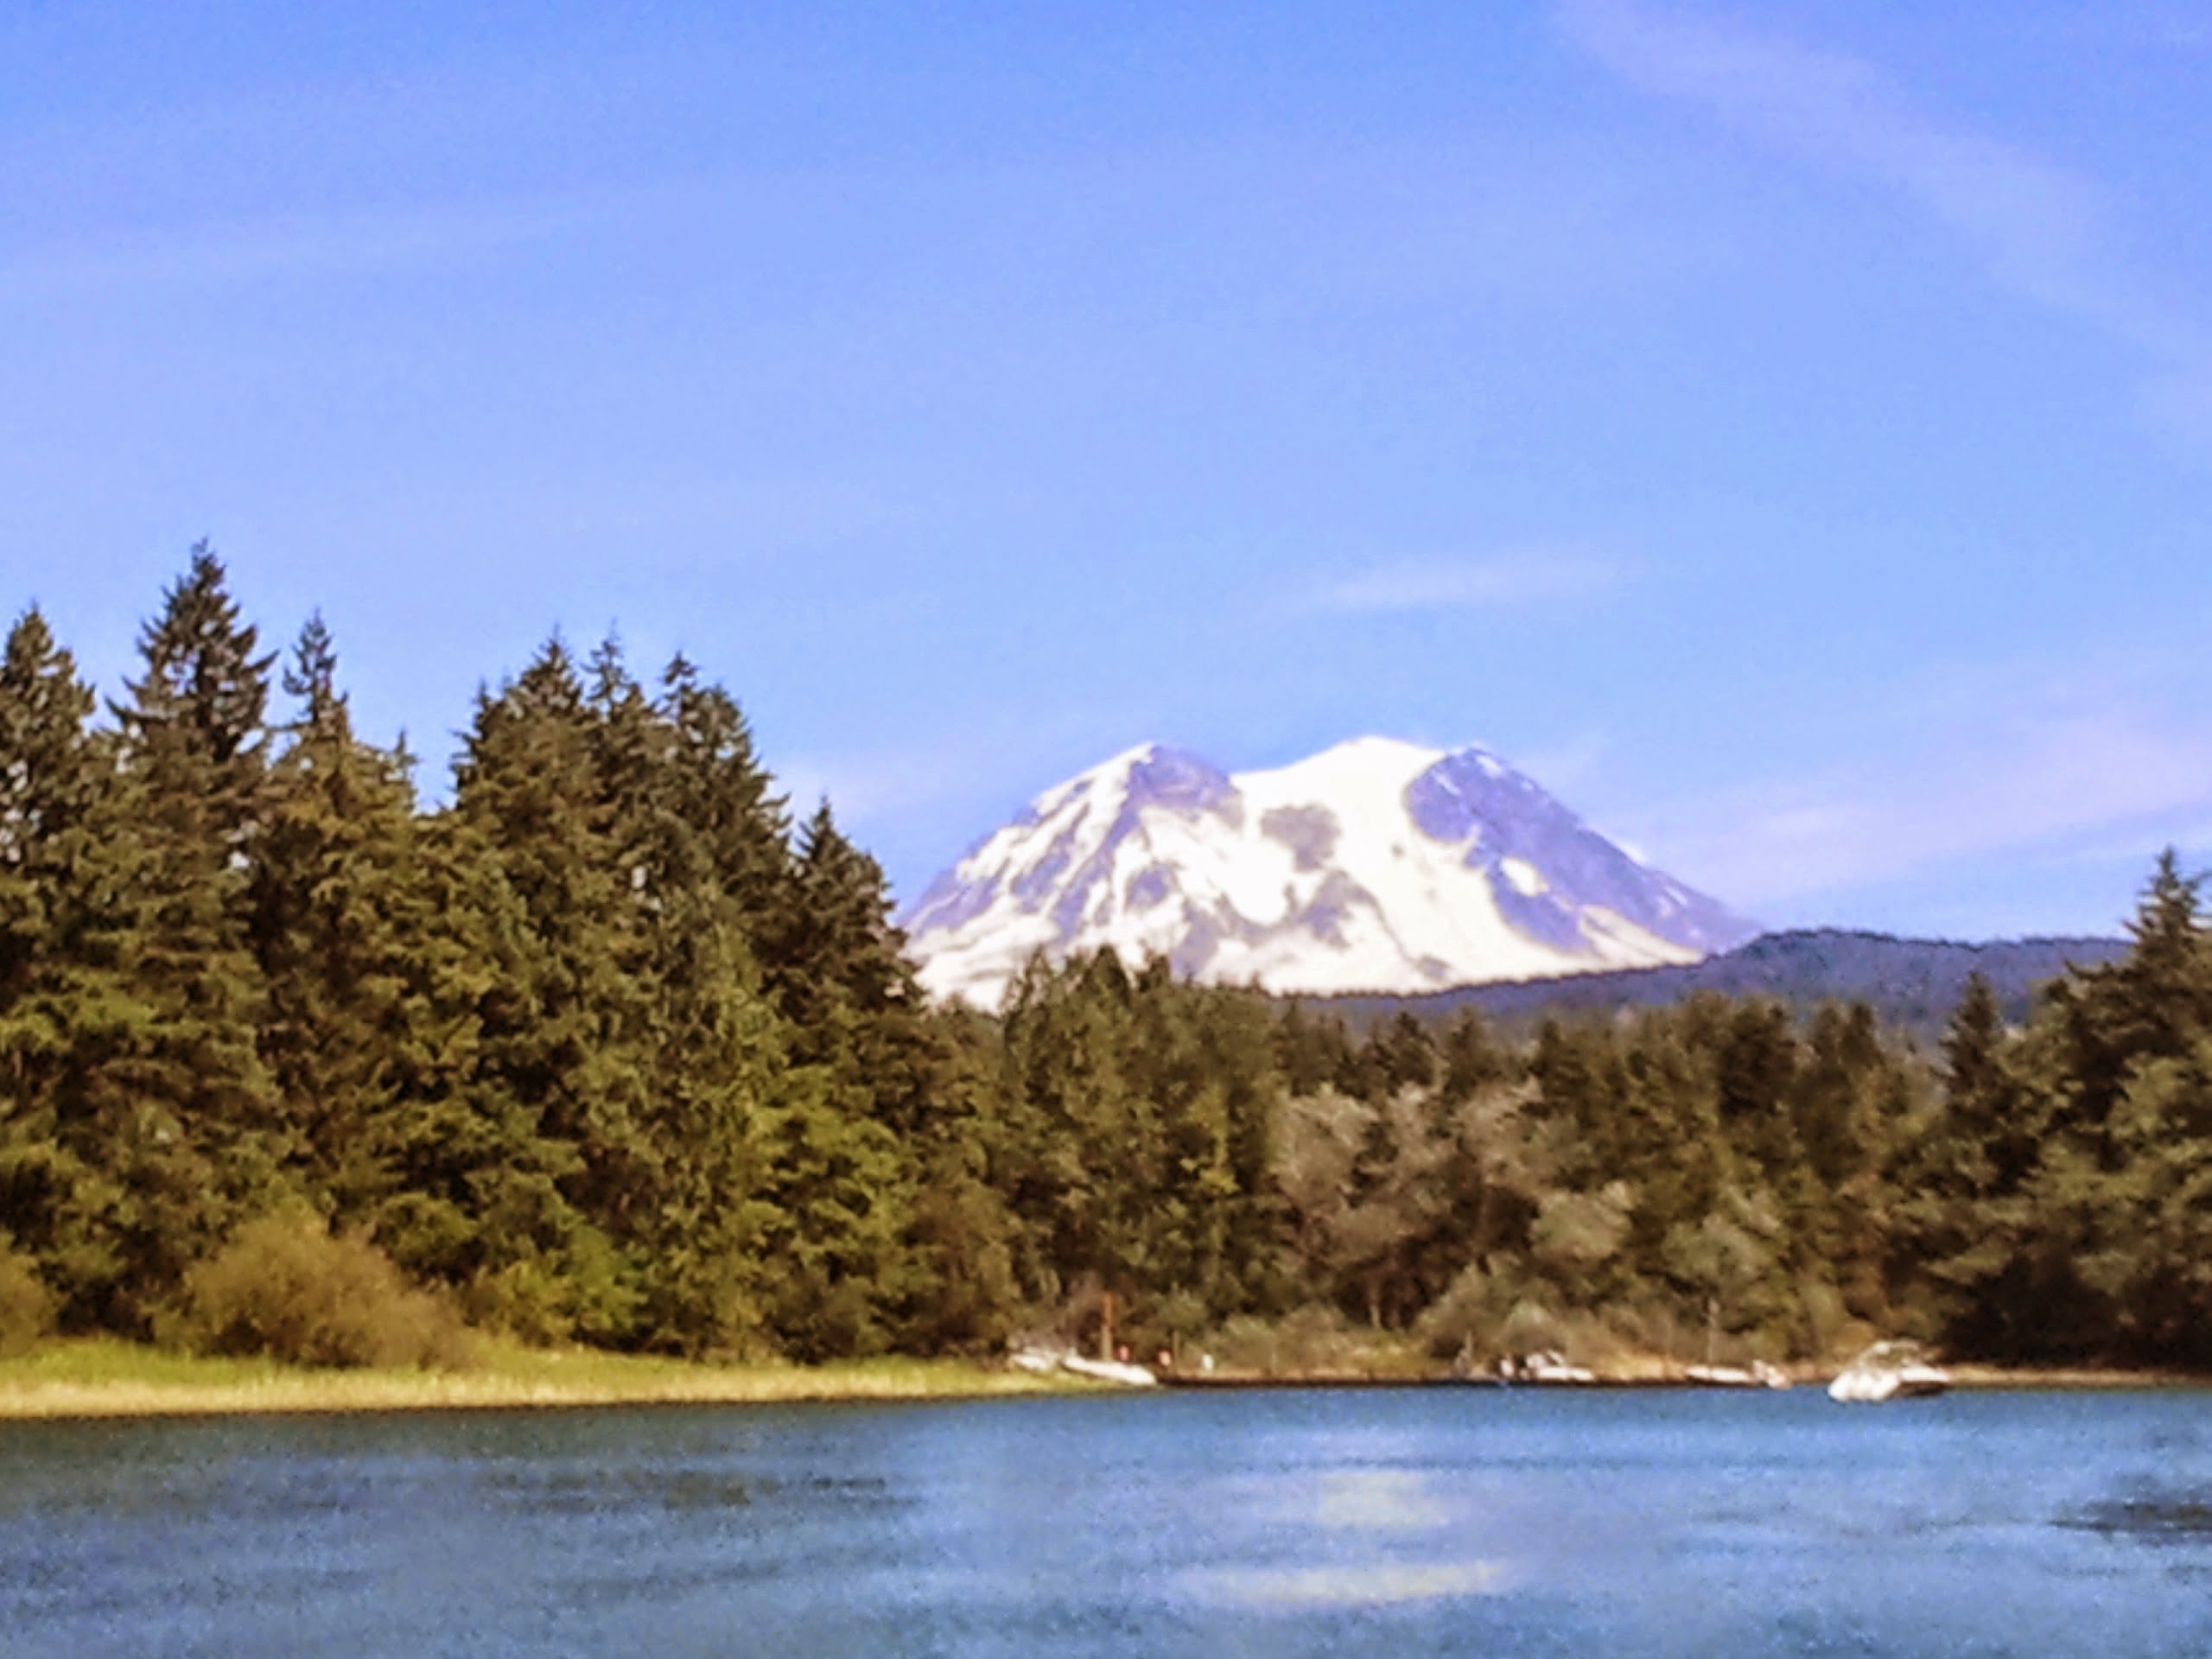 Camper submitted image from Alder Lake Park - 2